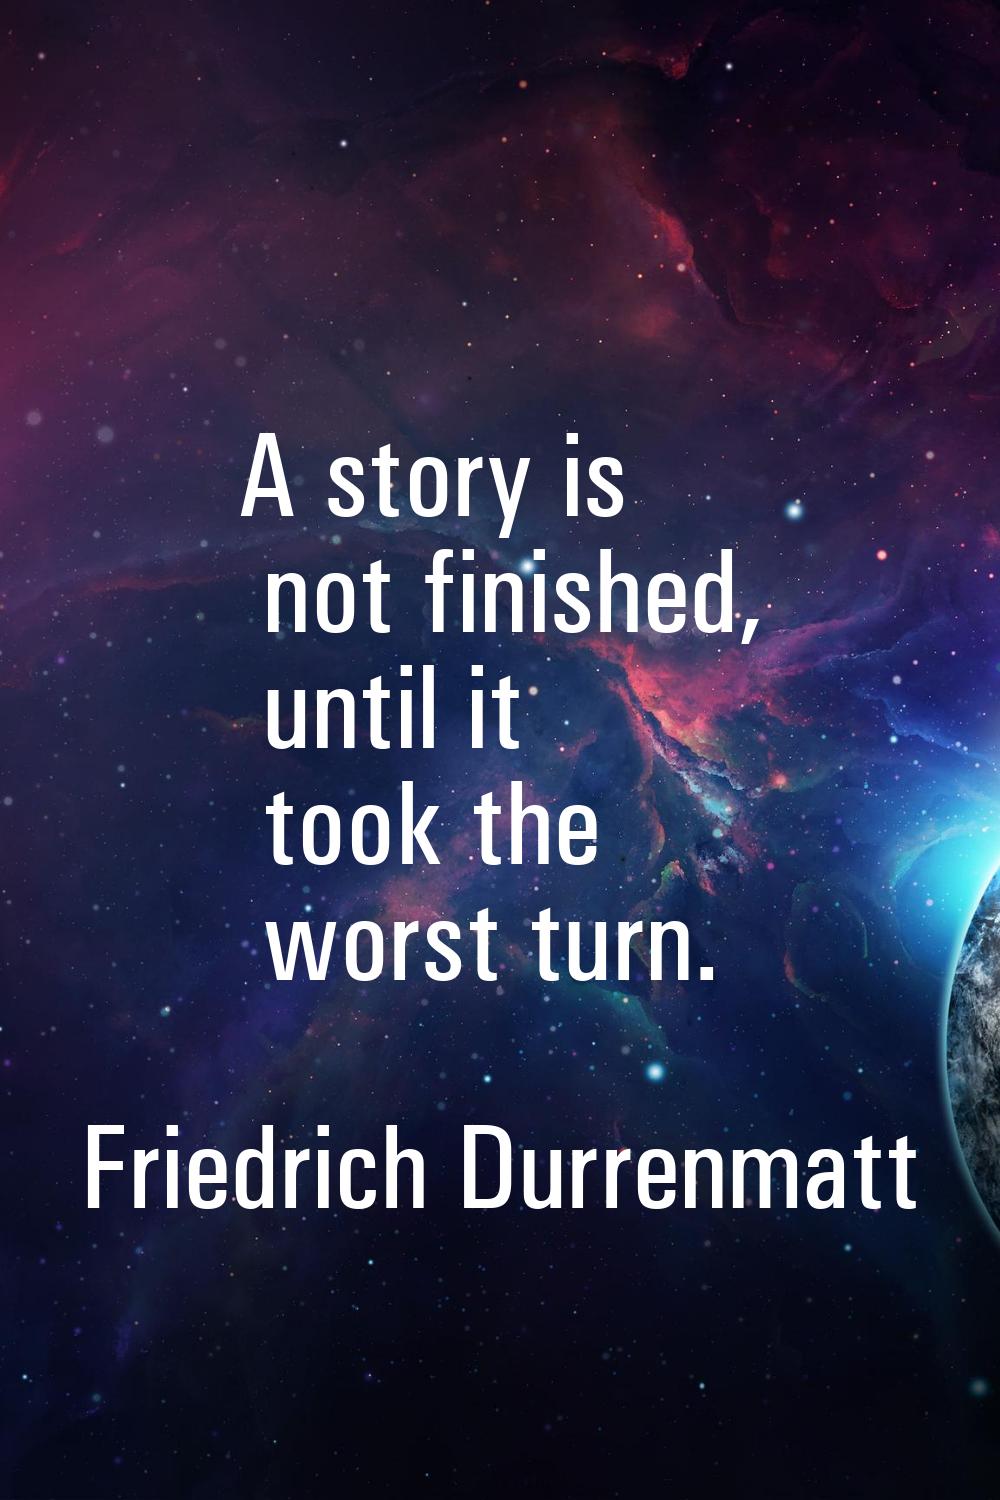 A story is not finished, until it took the worst turn.